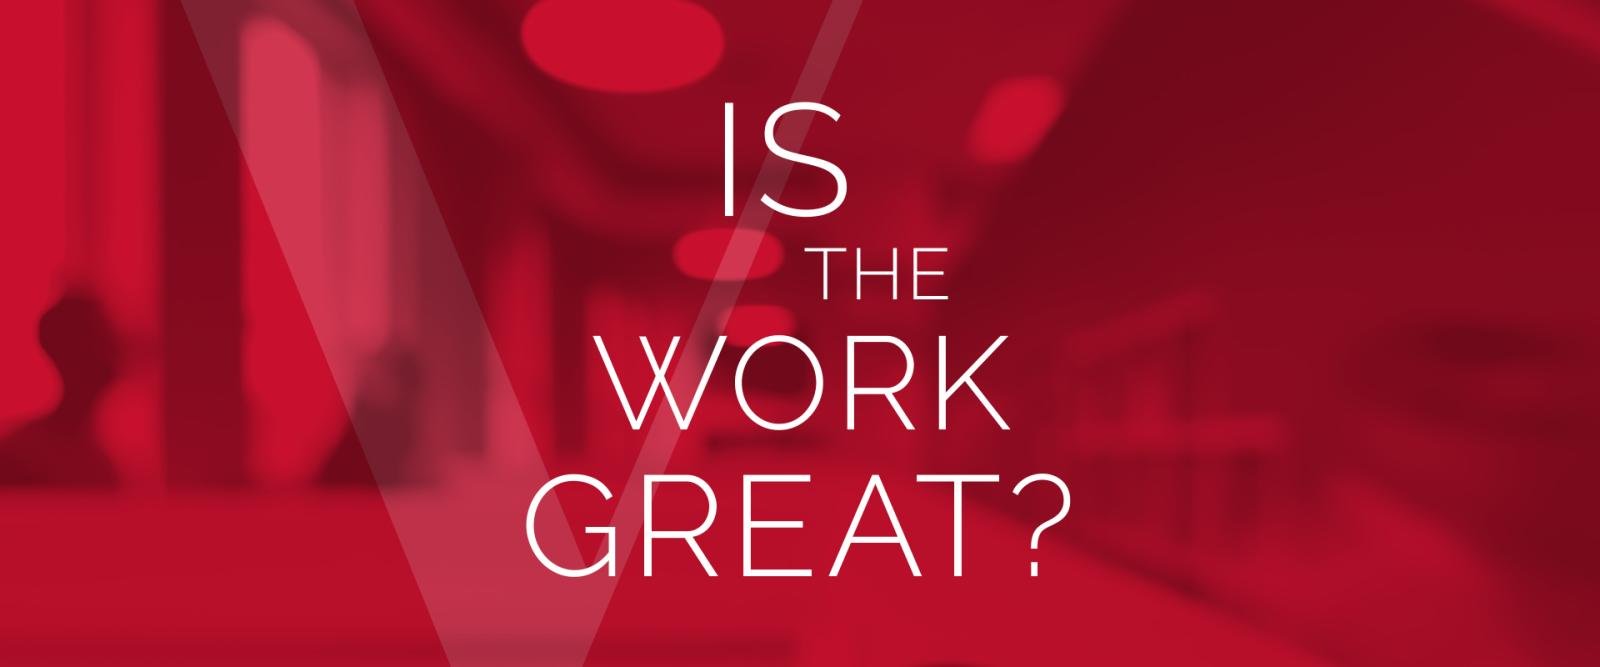 Is the work great?